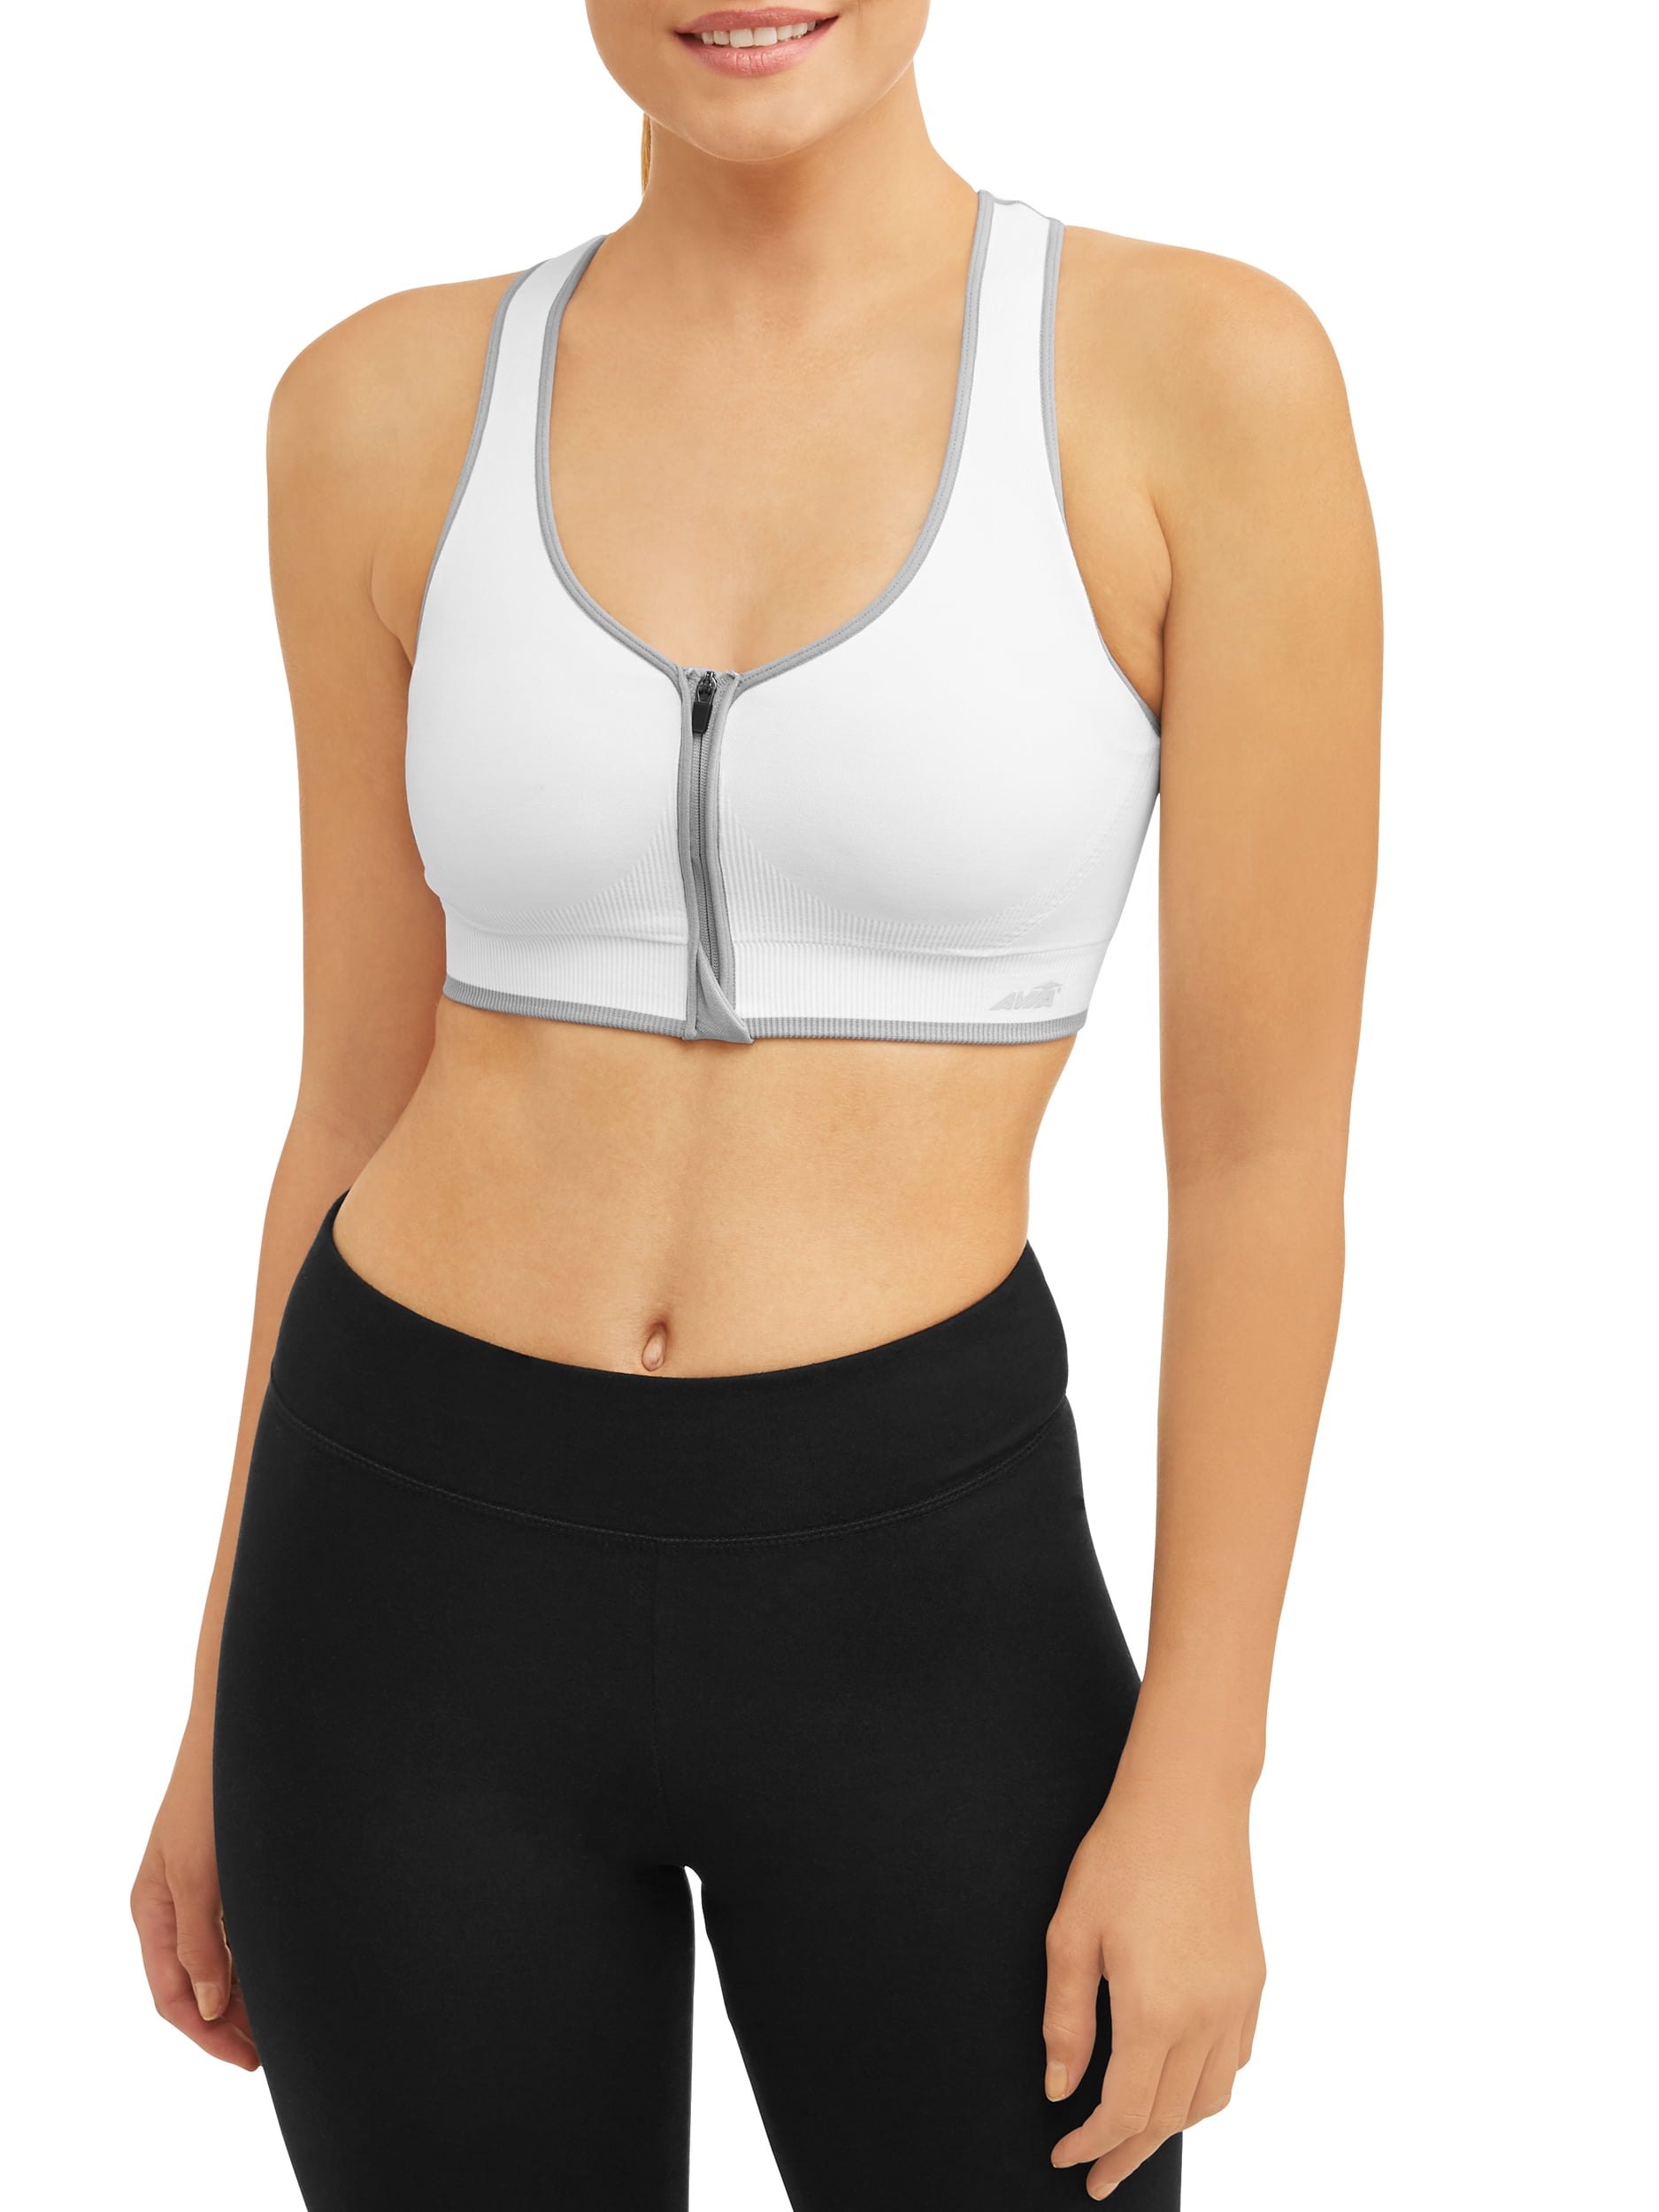 S AVIA SEAMLESS ZIP FRONT SPORTS BRA NEW WITH TAGS L/G, 